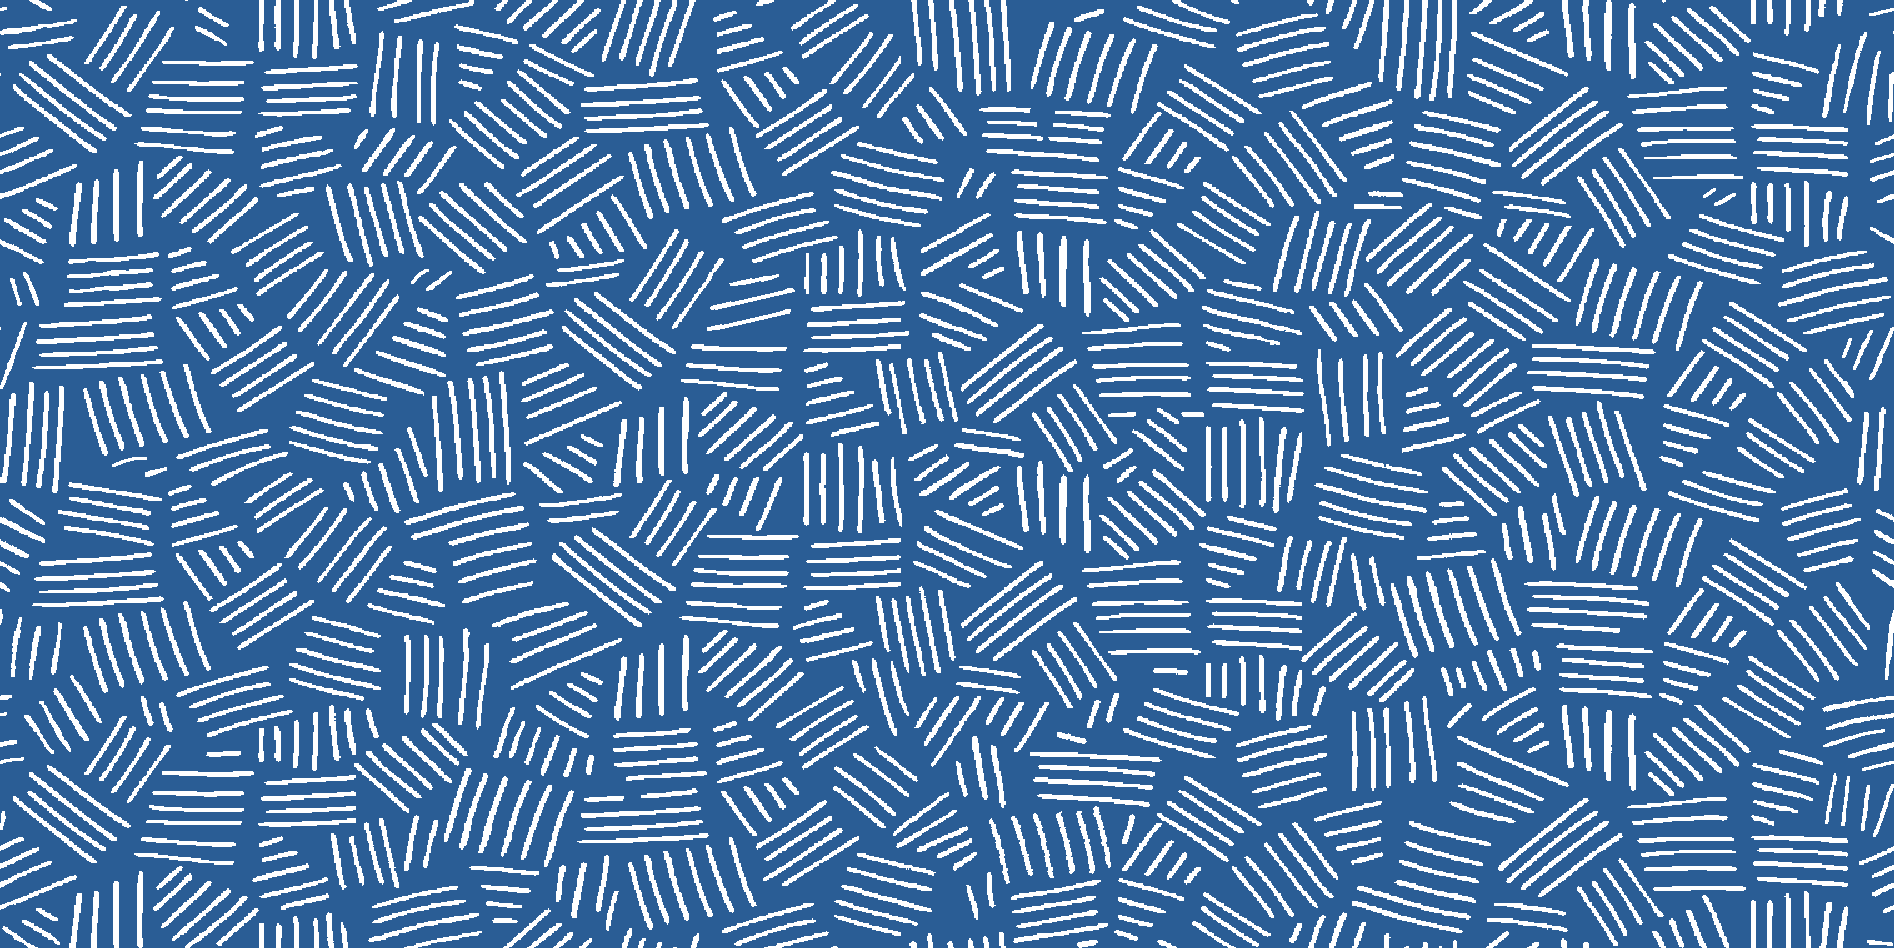 Waverly Inspirations Cotton 44" Doodle Lapis Color Sewing Fabric by the Yard